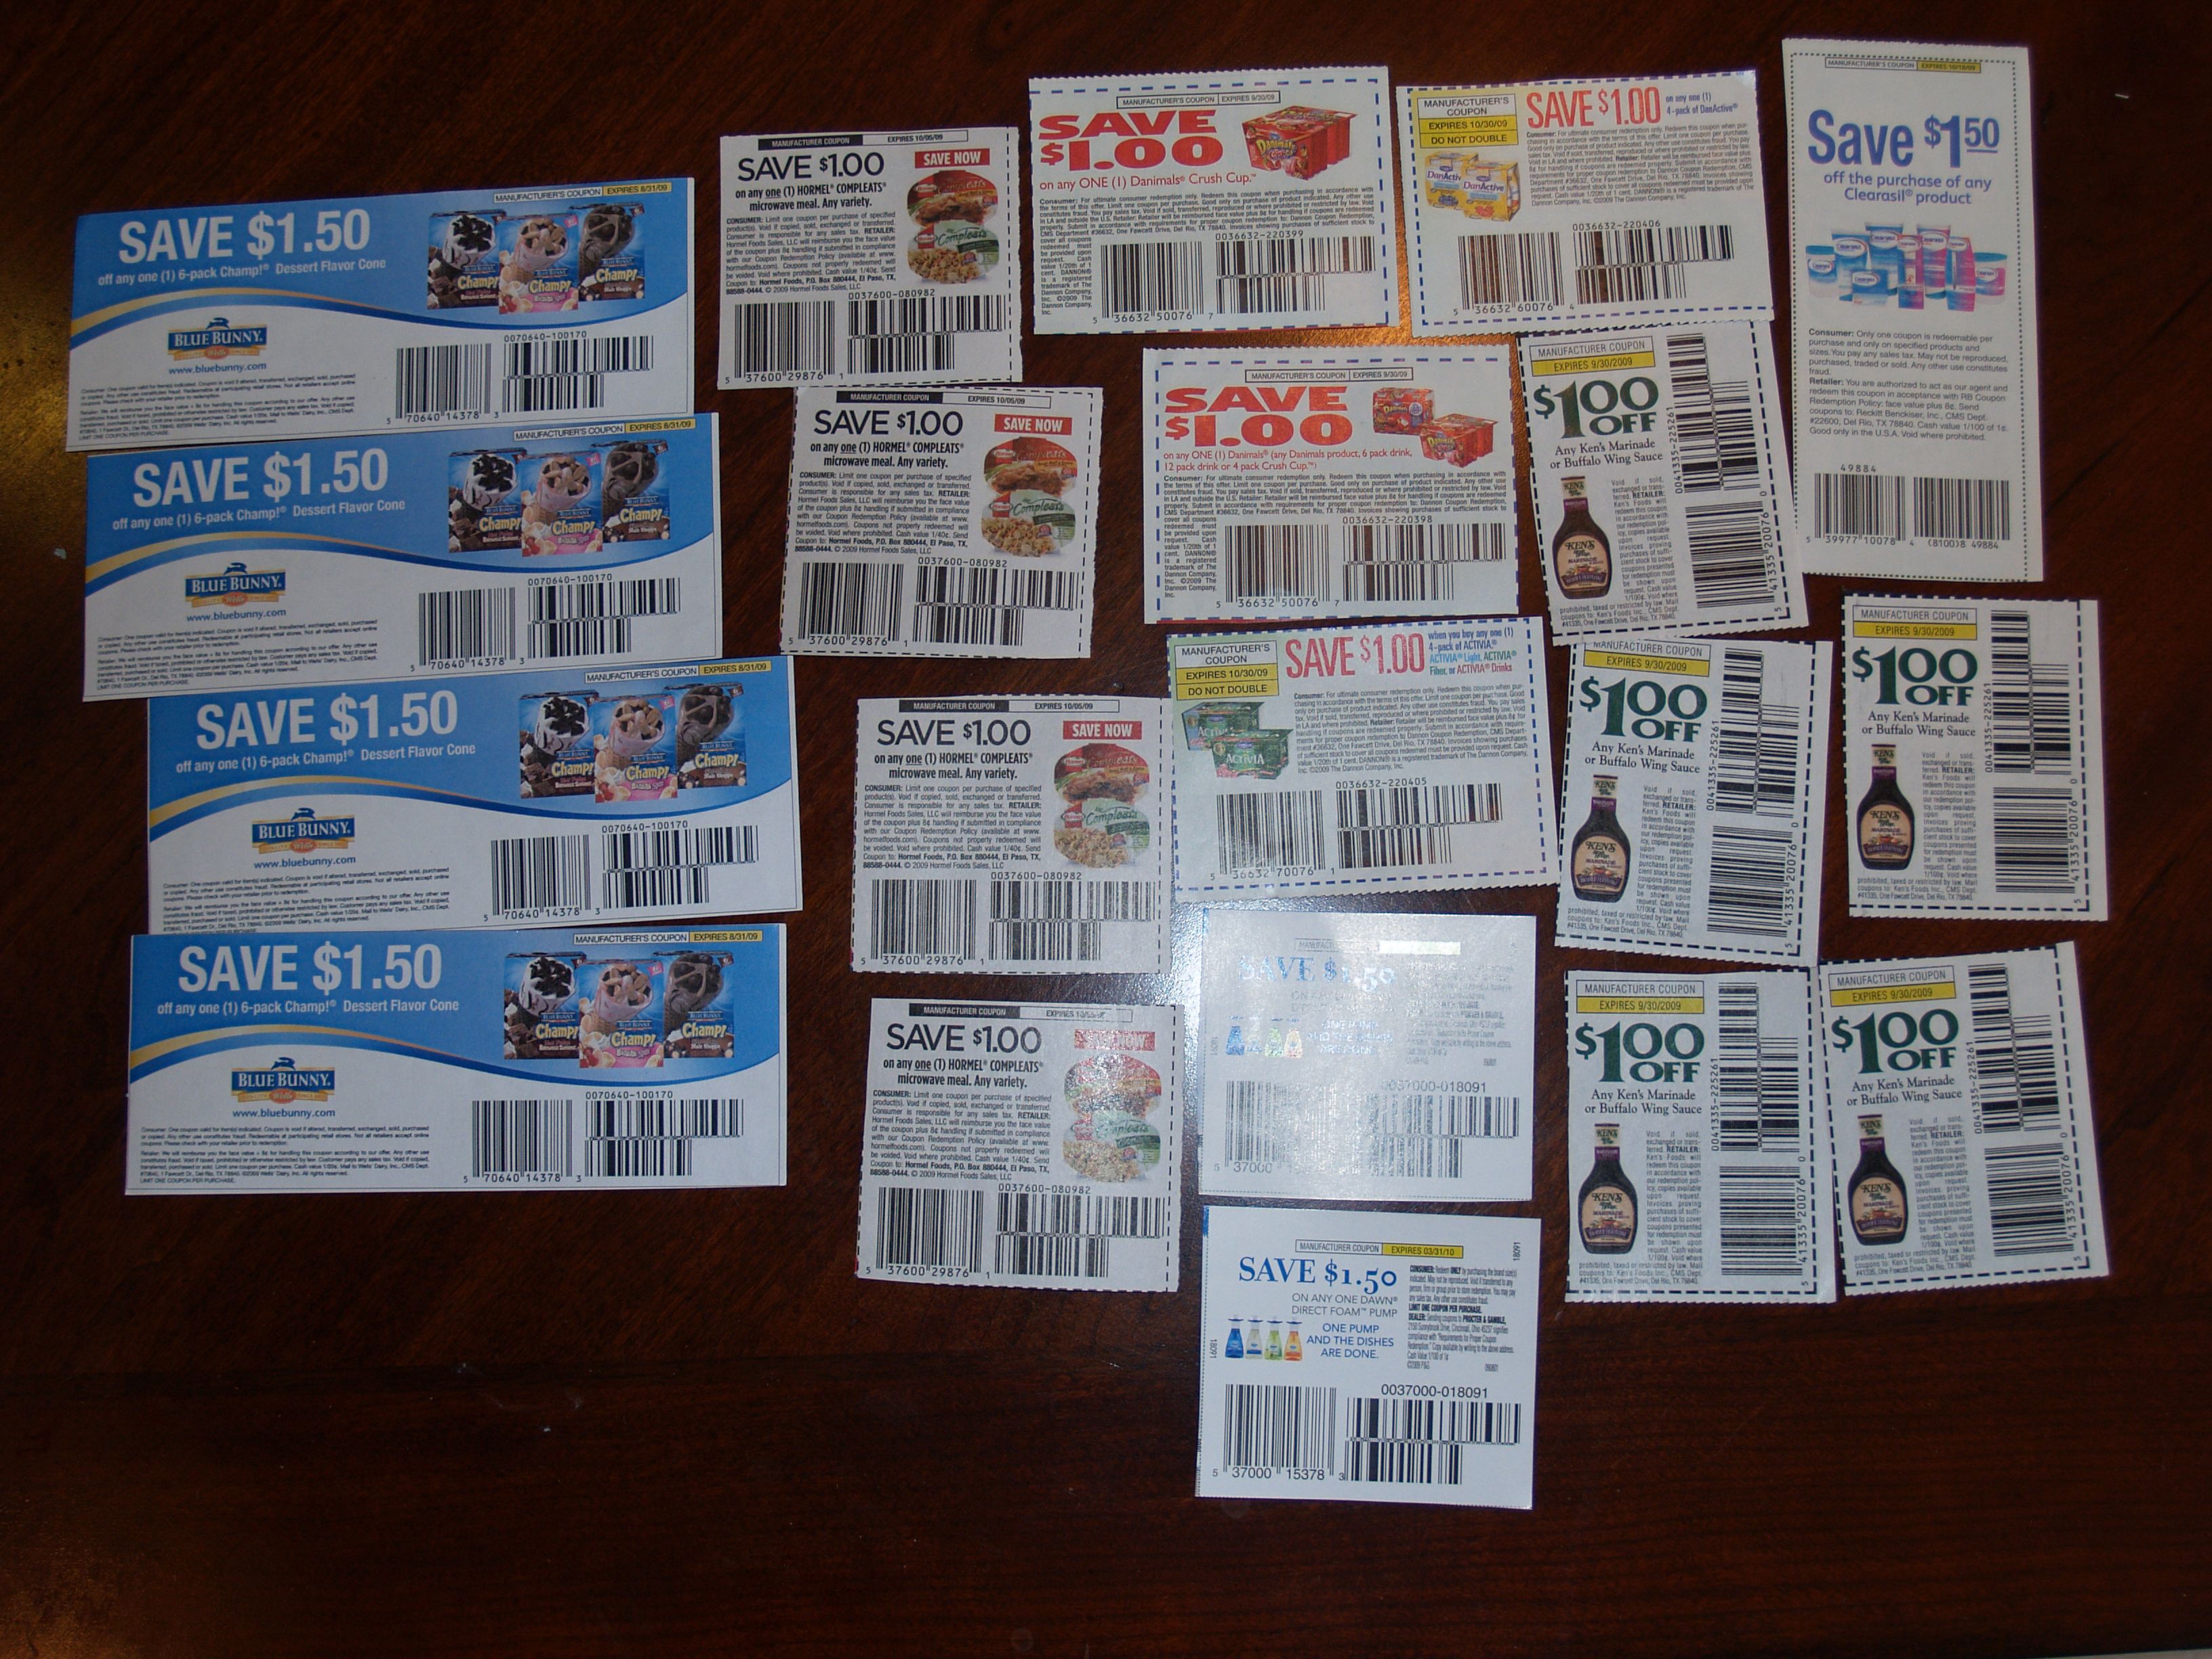 Some coupons I used_08.26.09